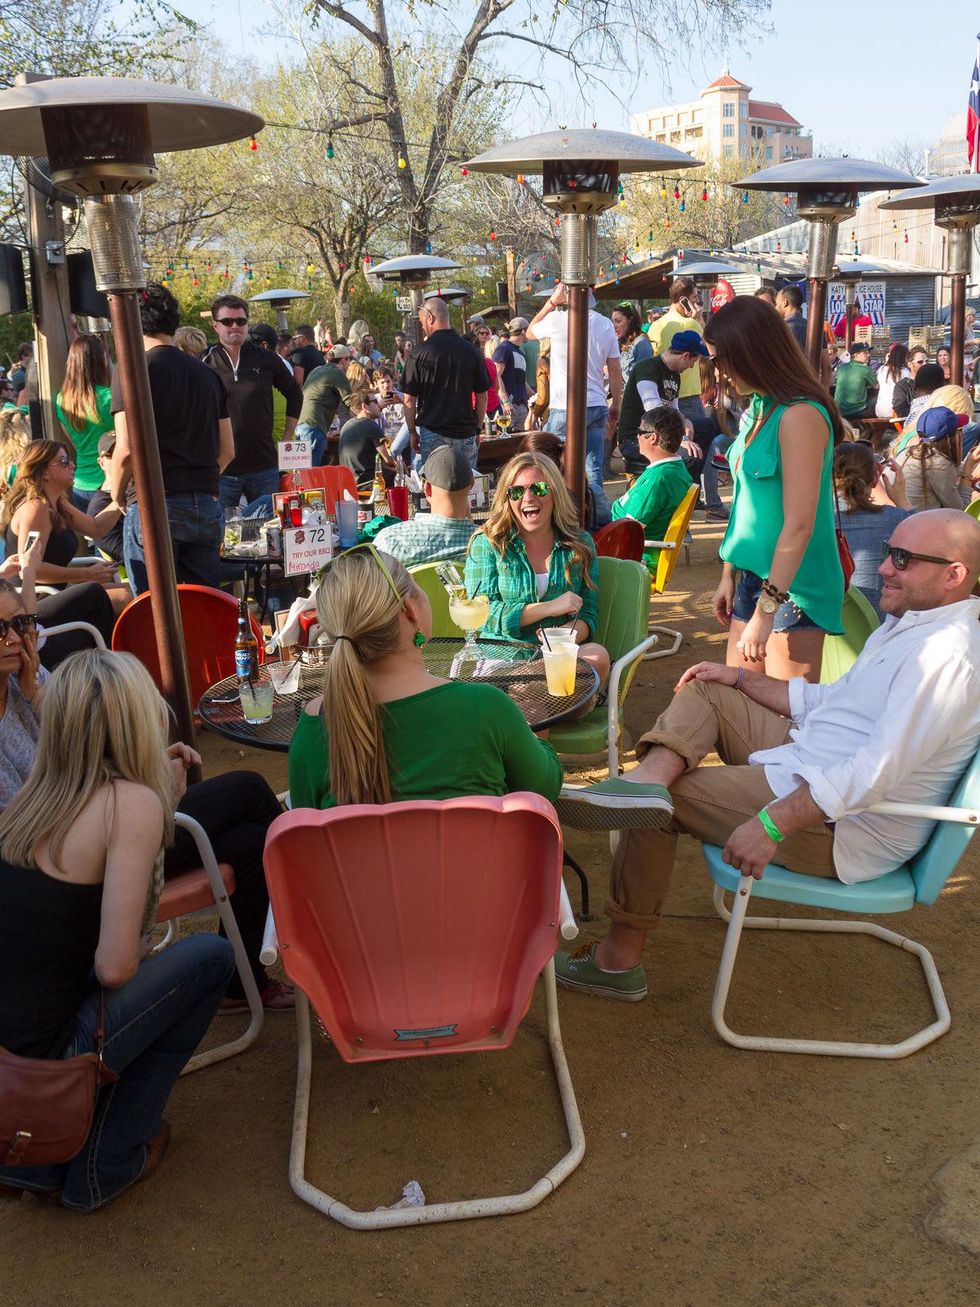 Patio at Katy Trail Ice House in Dallas